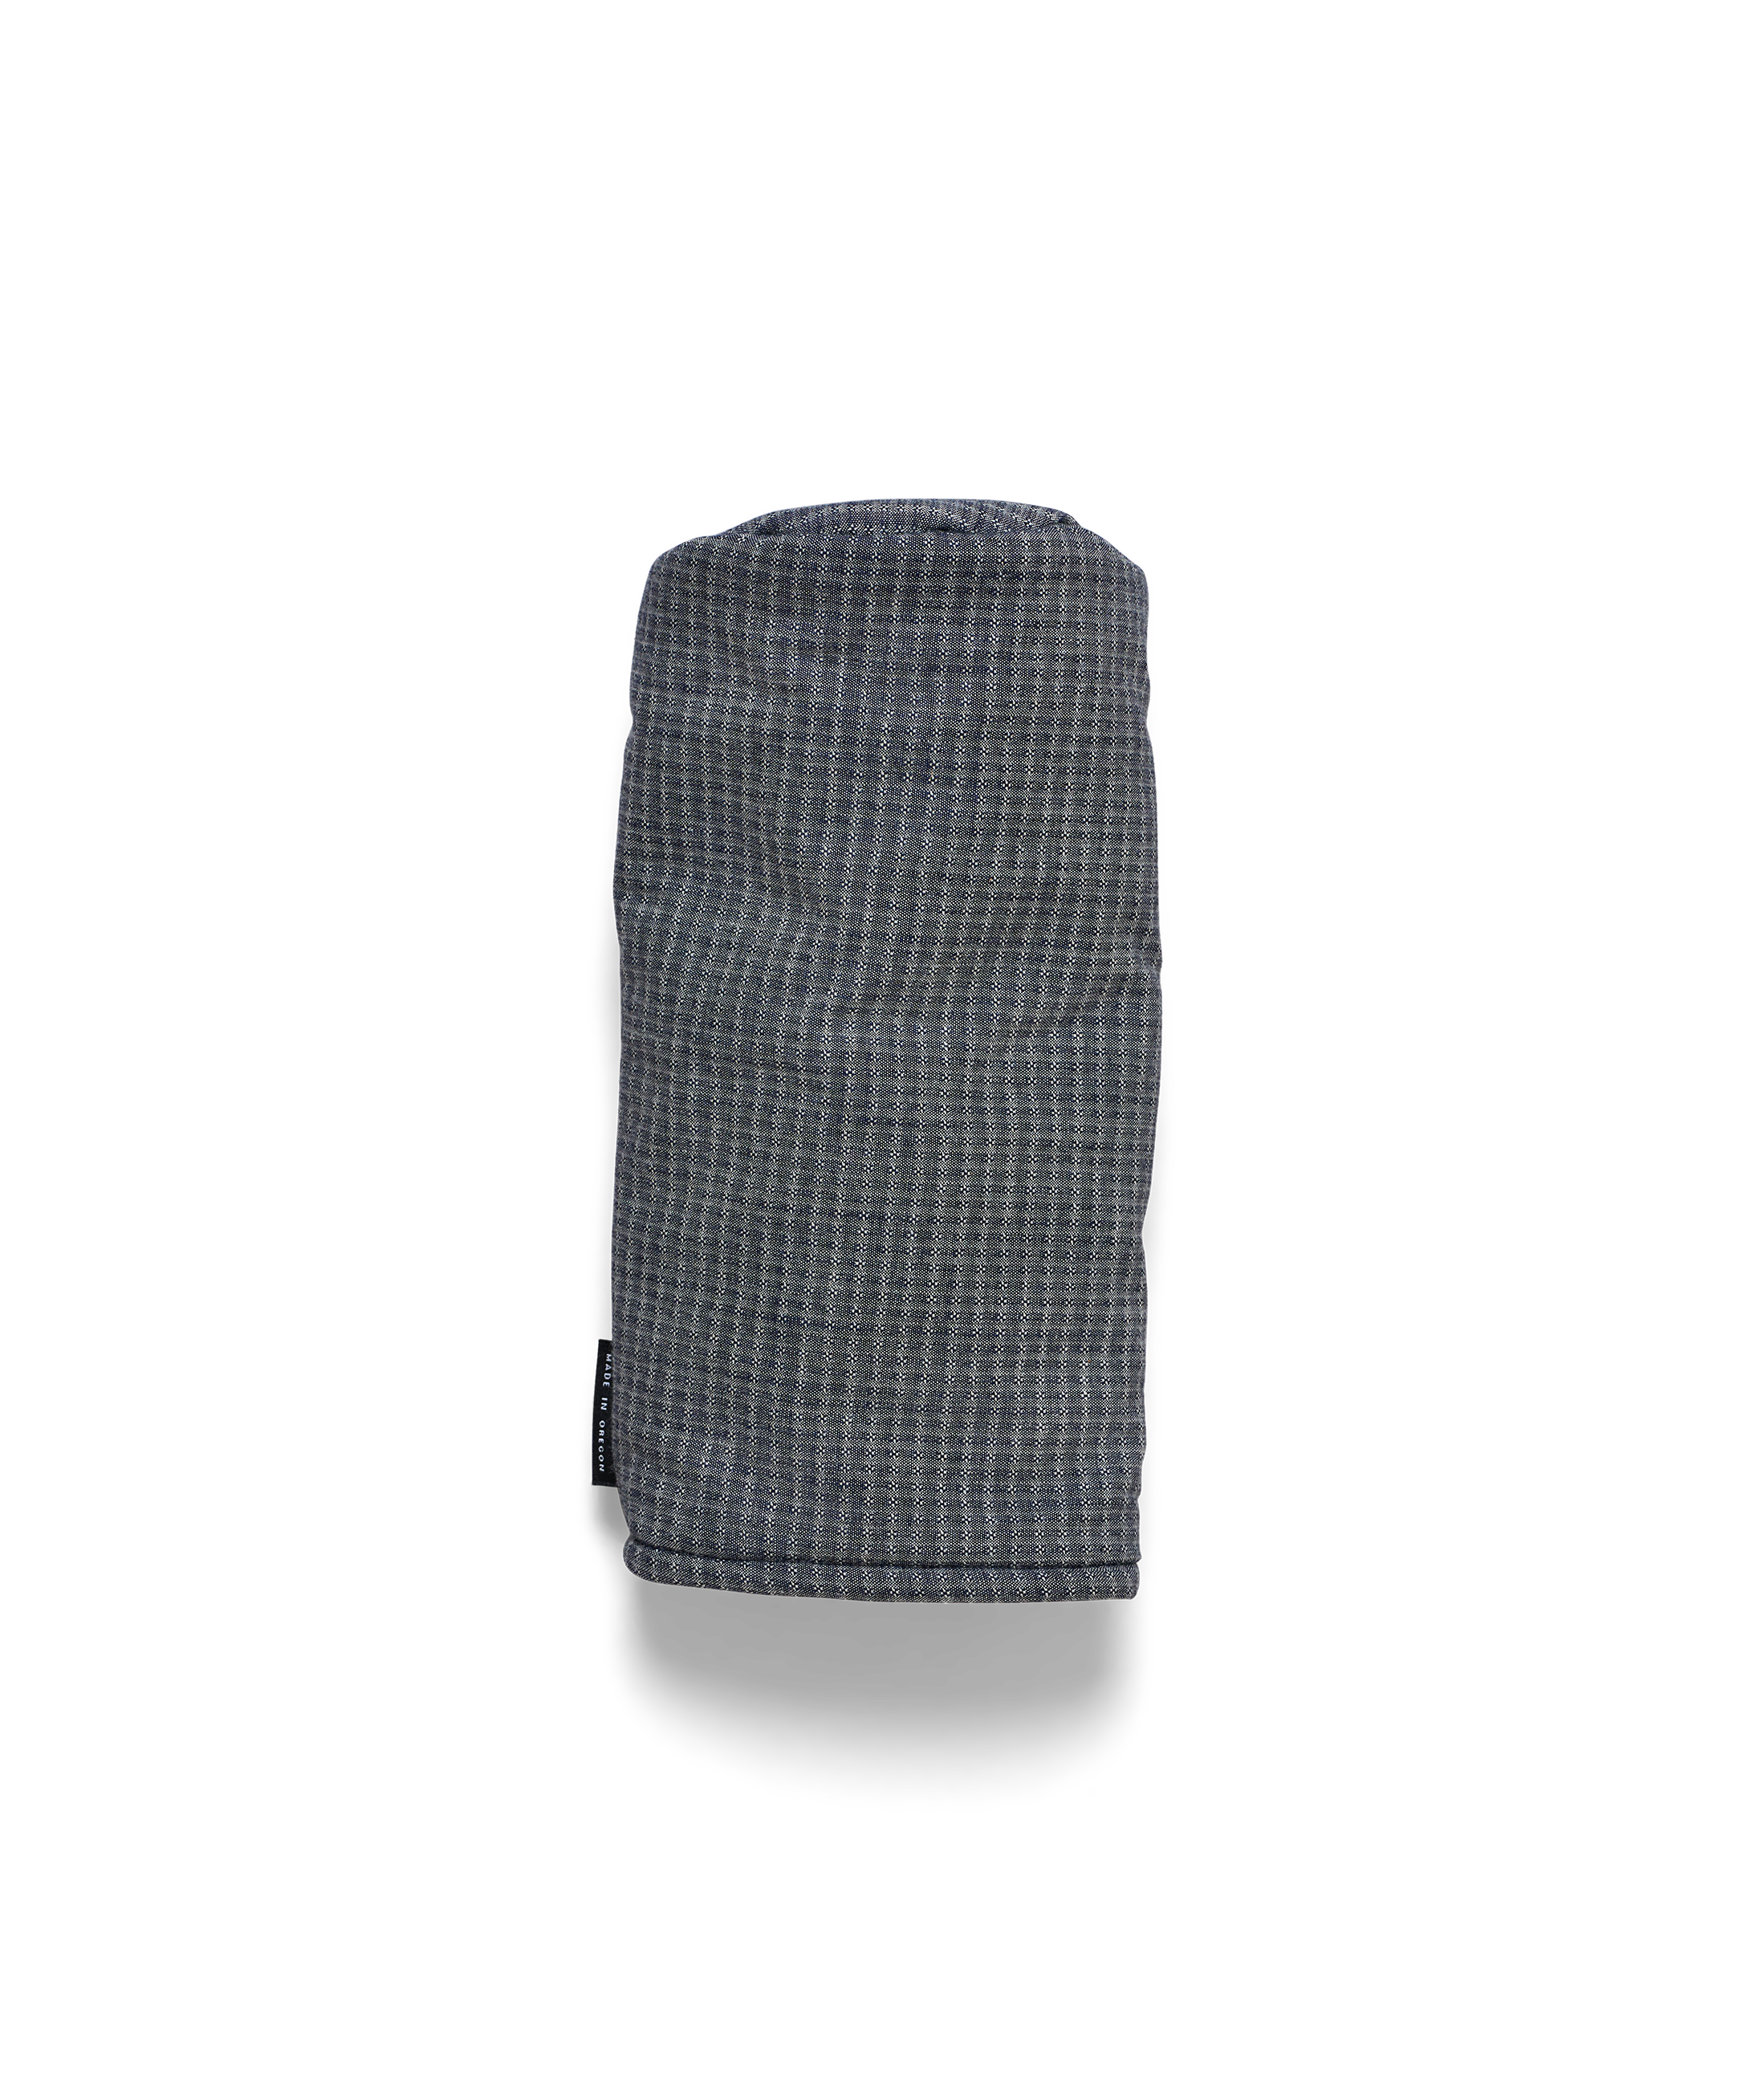 Limited Seamus Textured Chambray Driver Head Cover